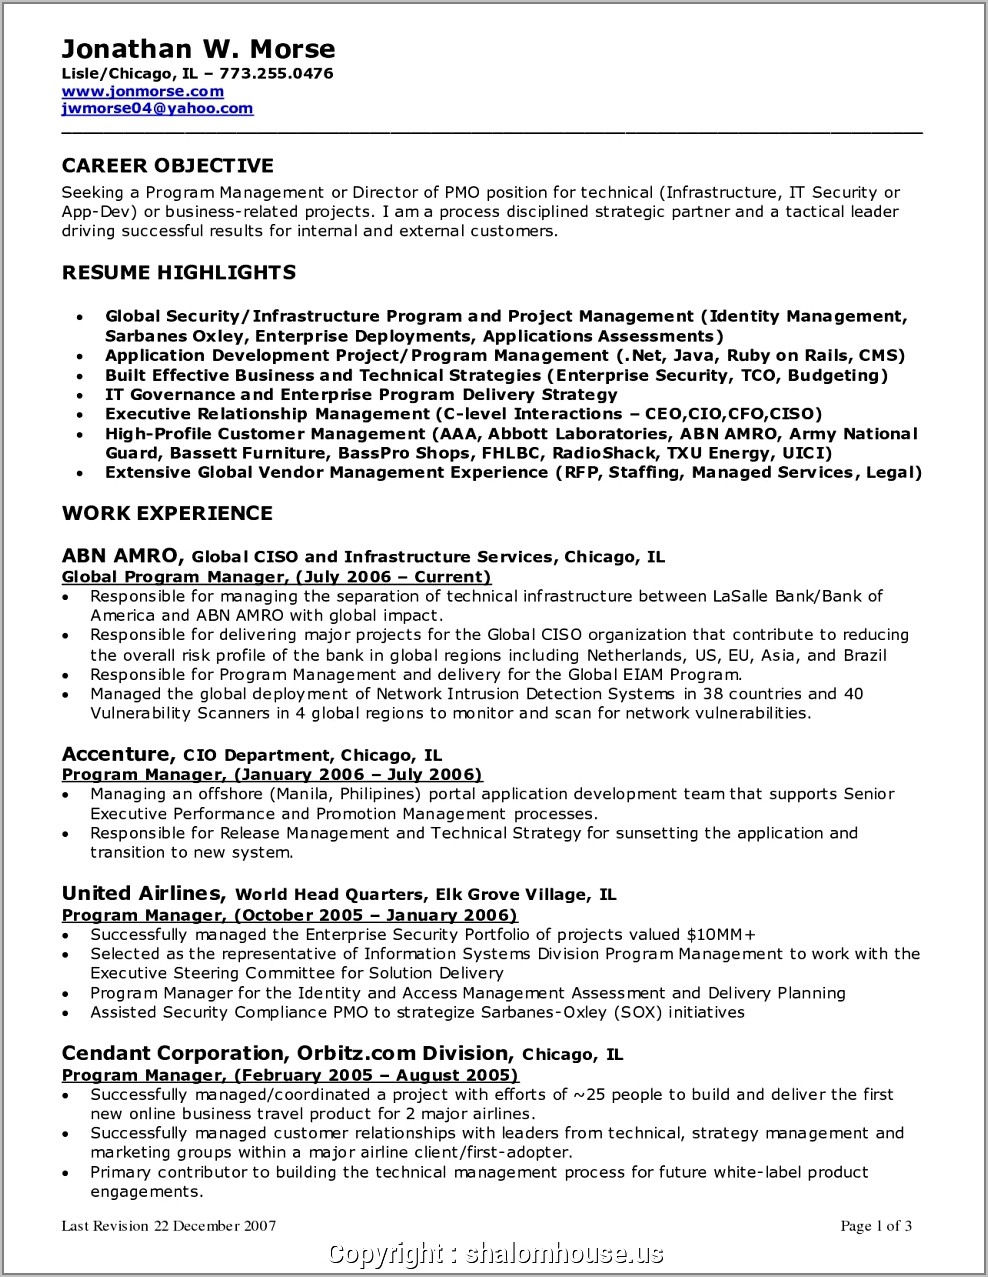 Resume Objective Examples For Sales Executive